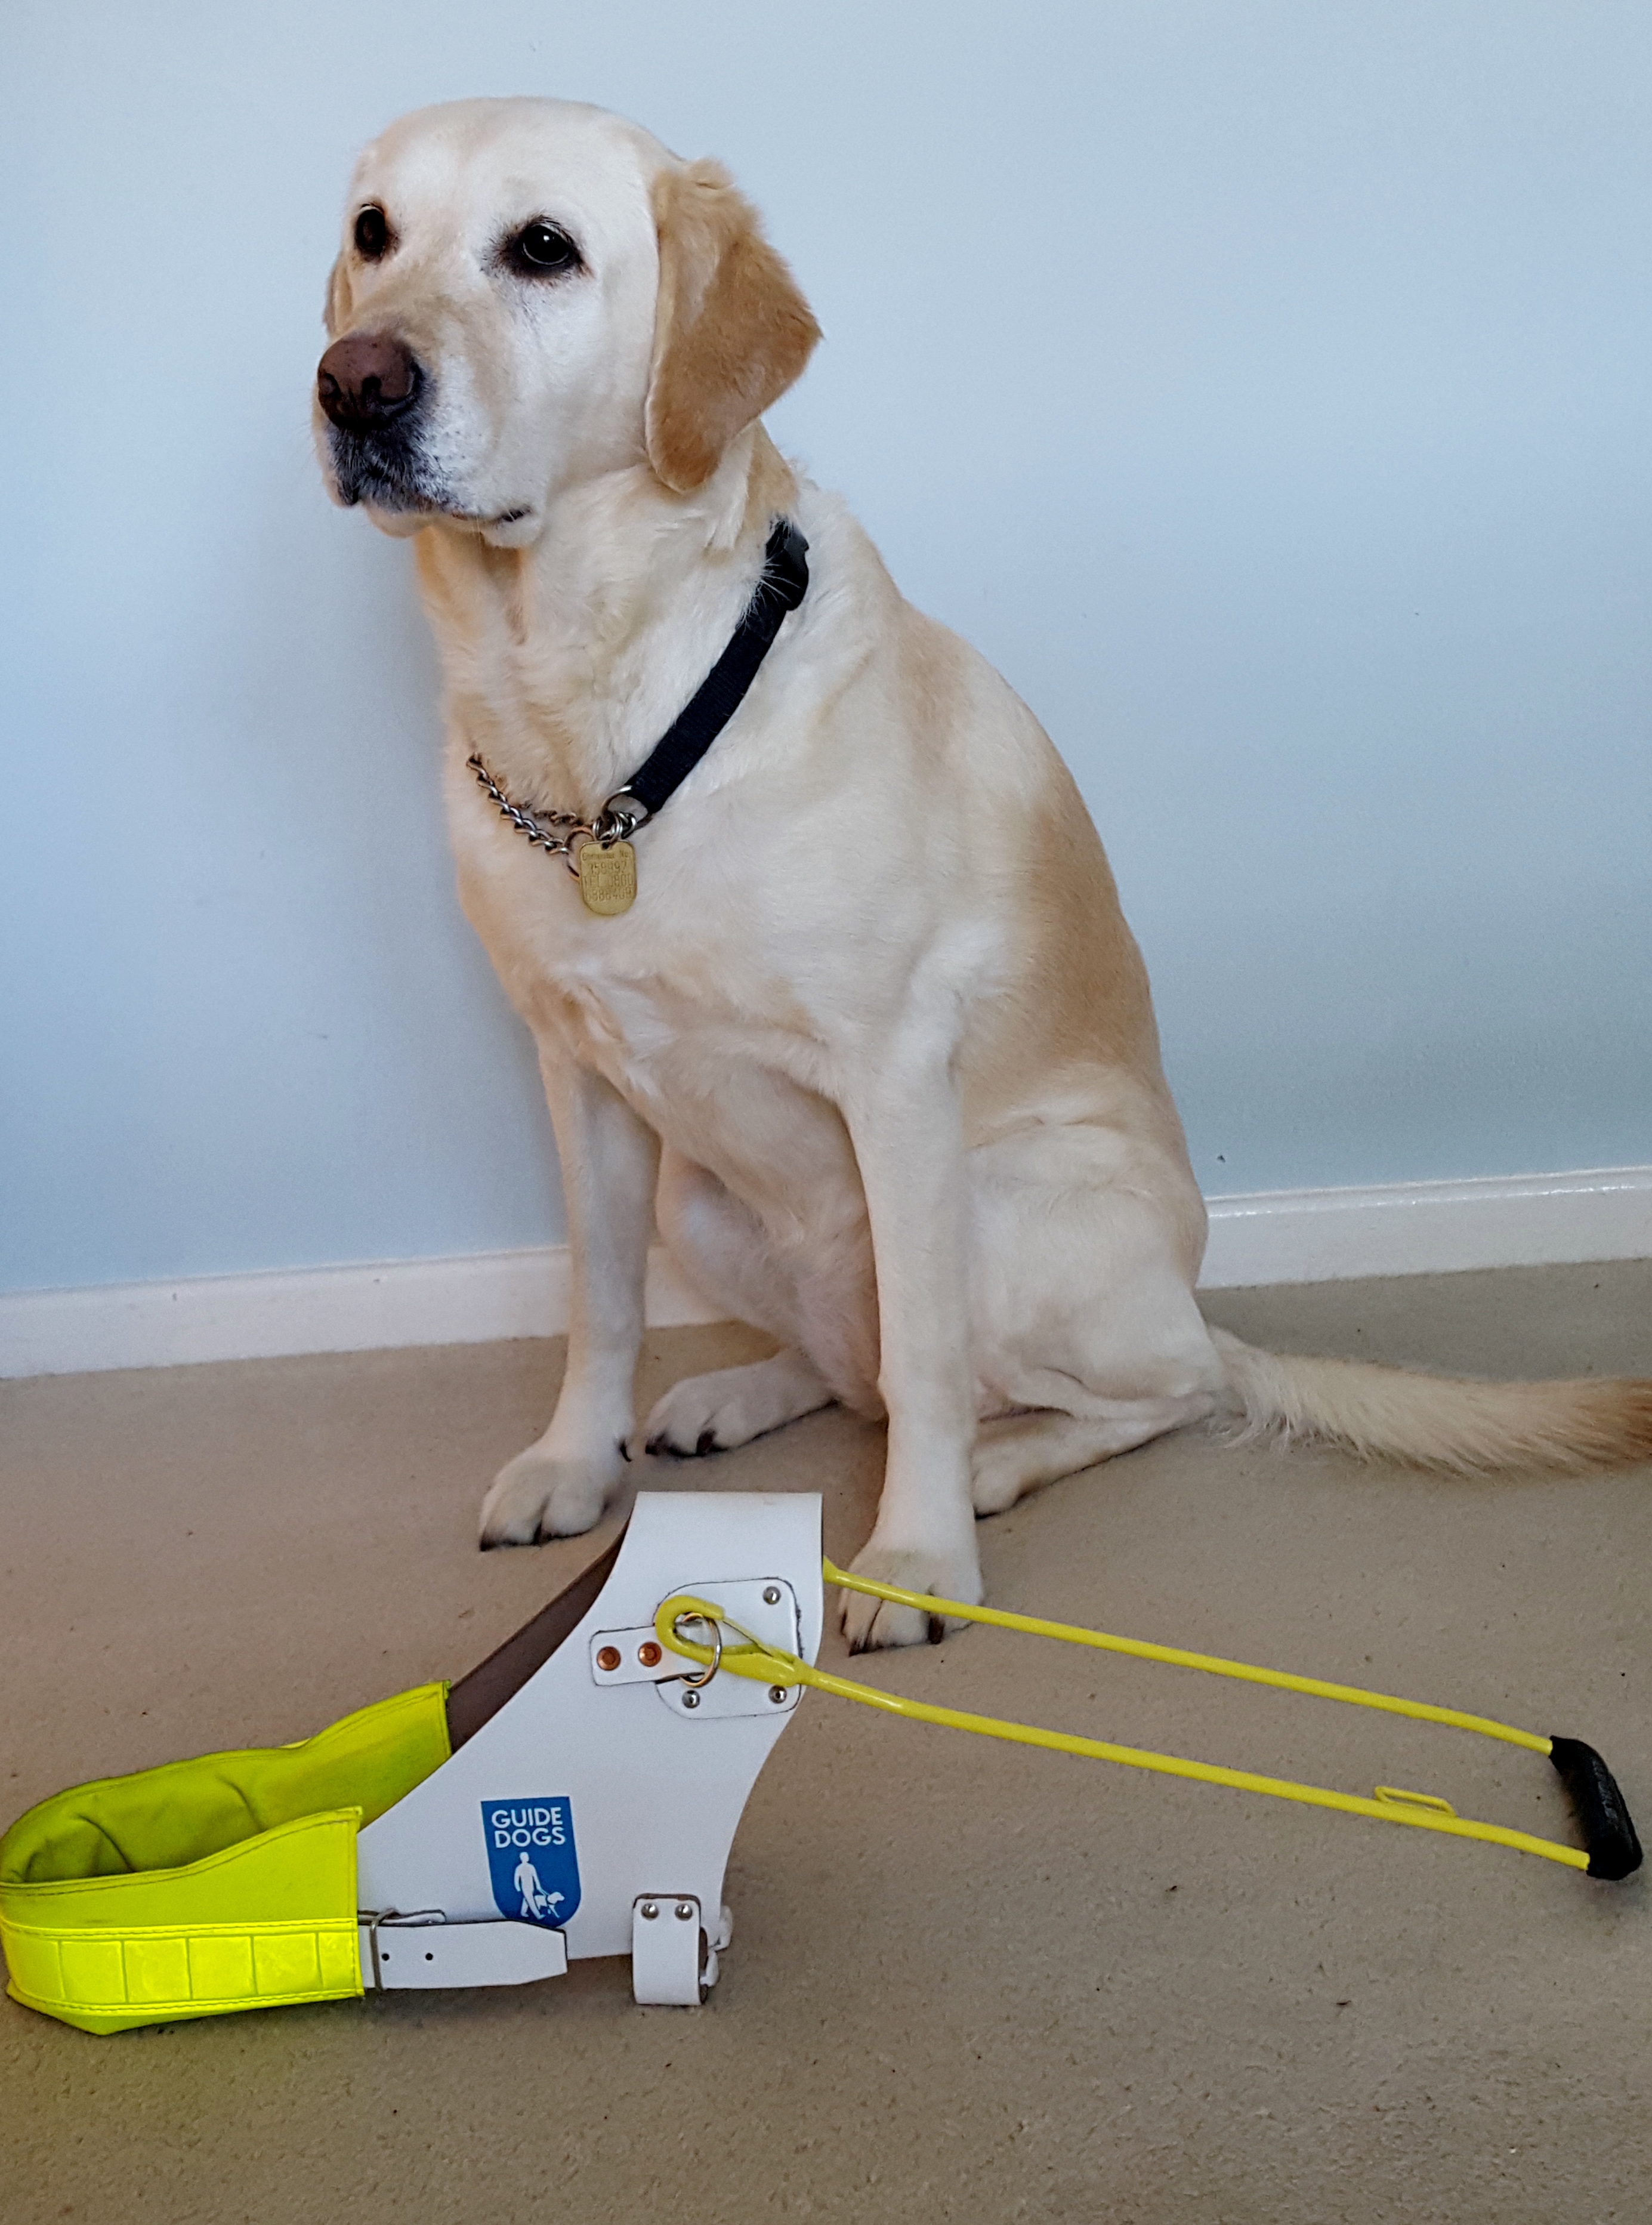 Zoe the guide dog sitting down with guide dog harness beside her